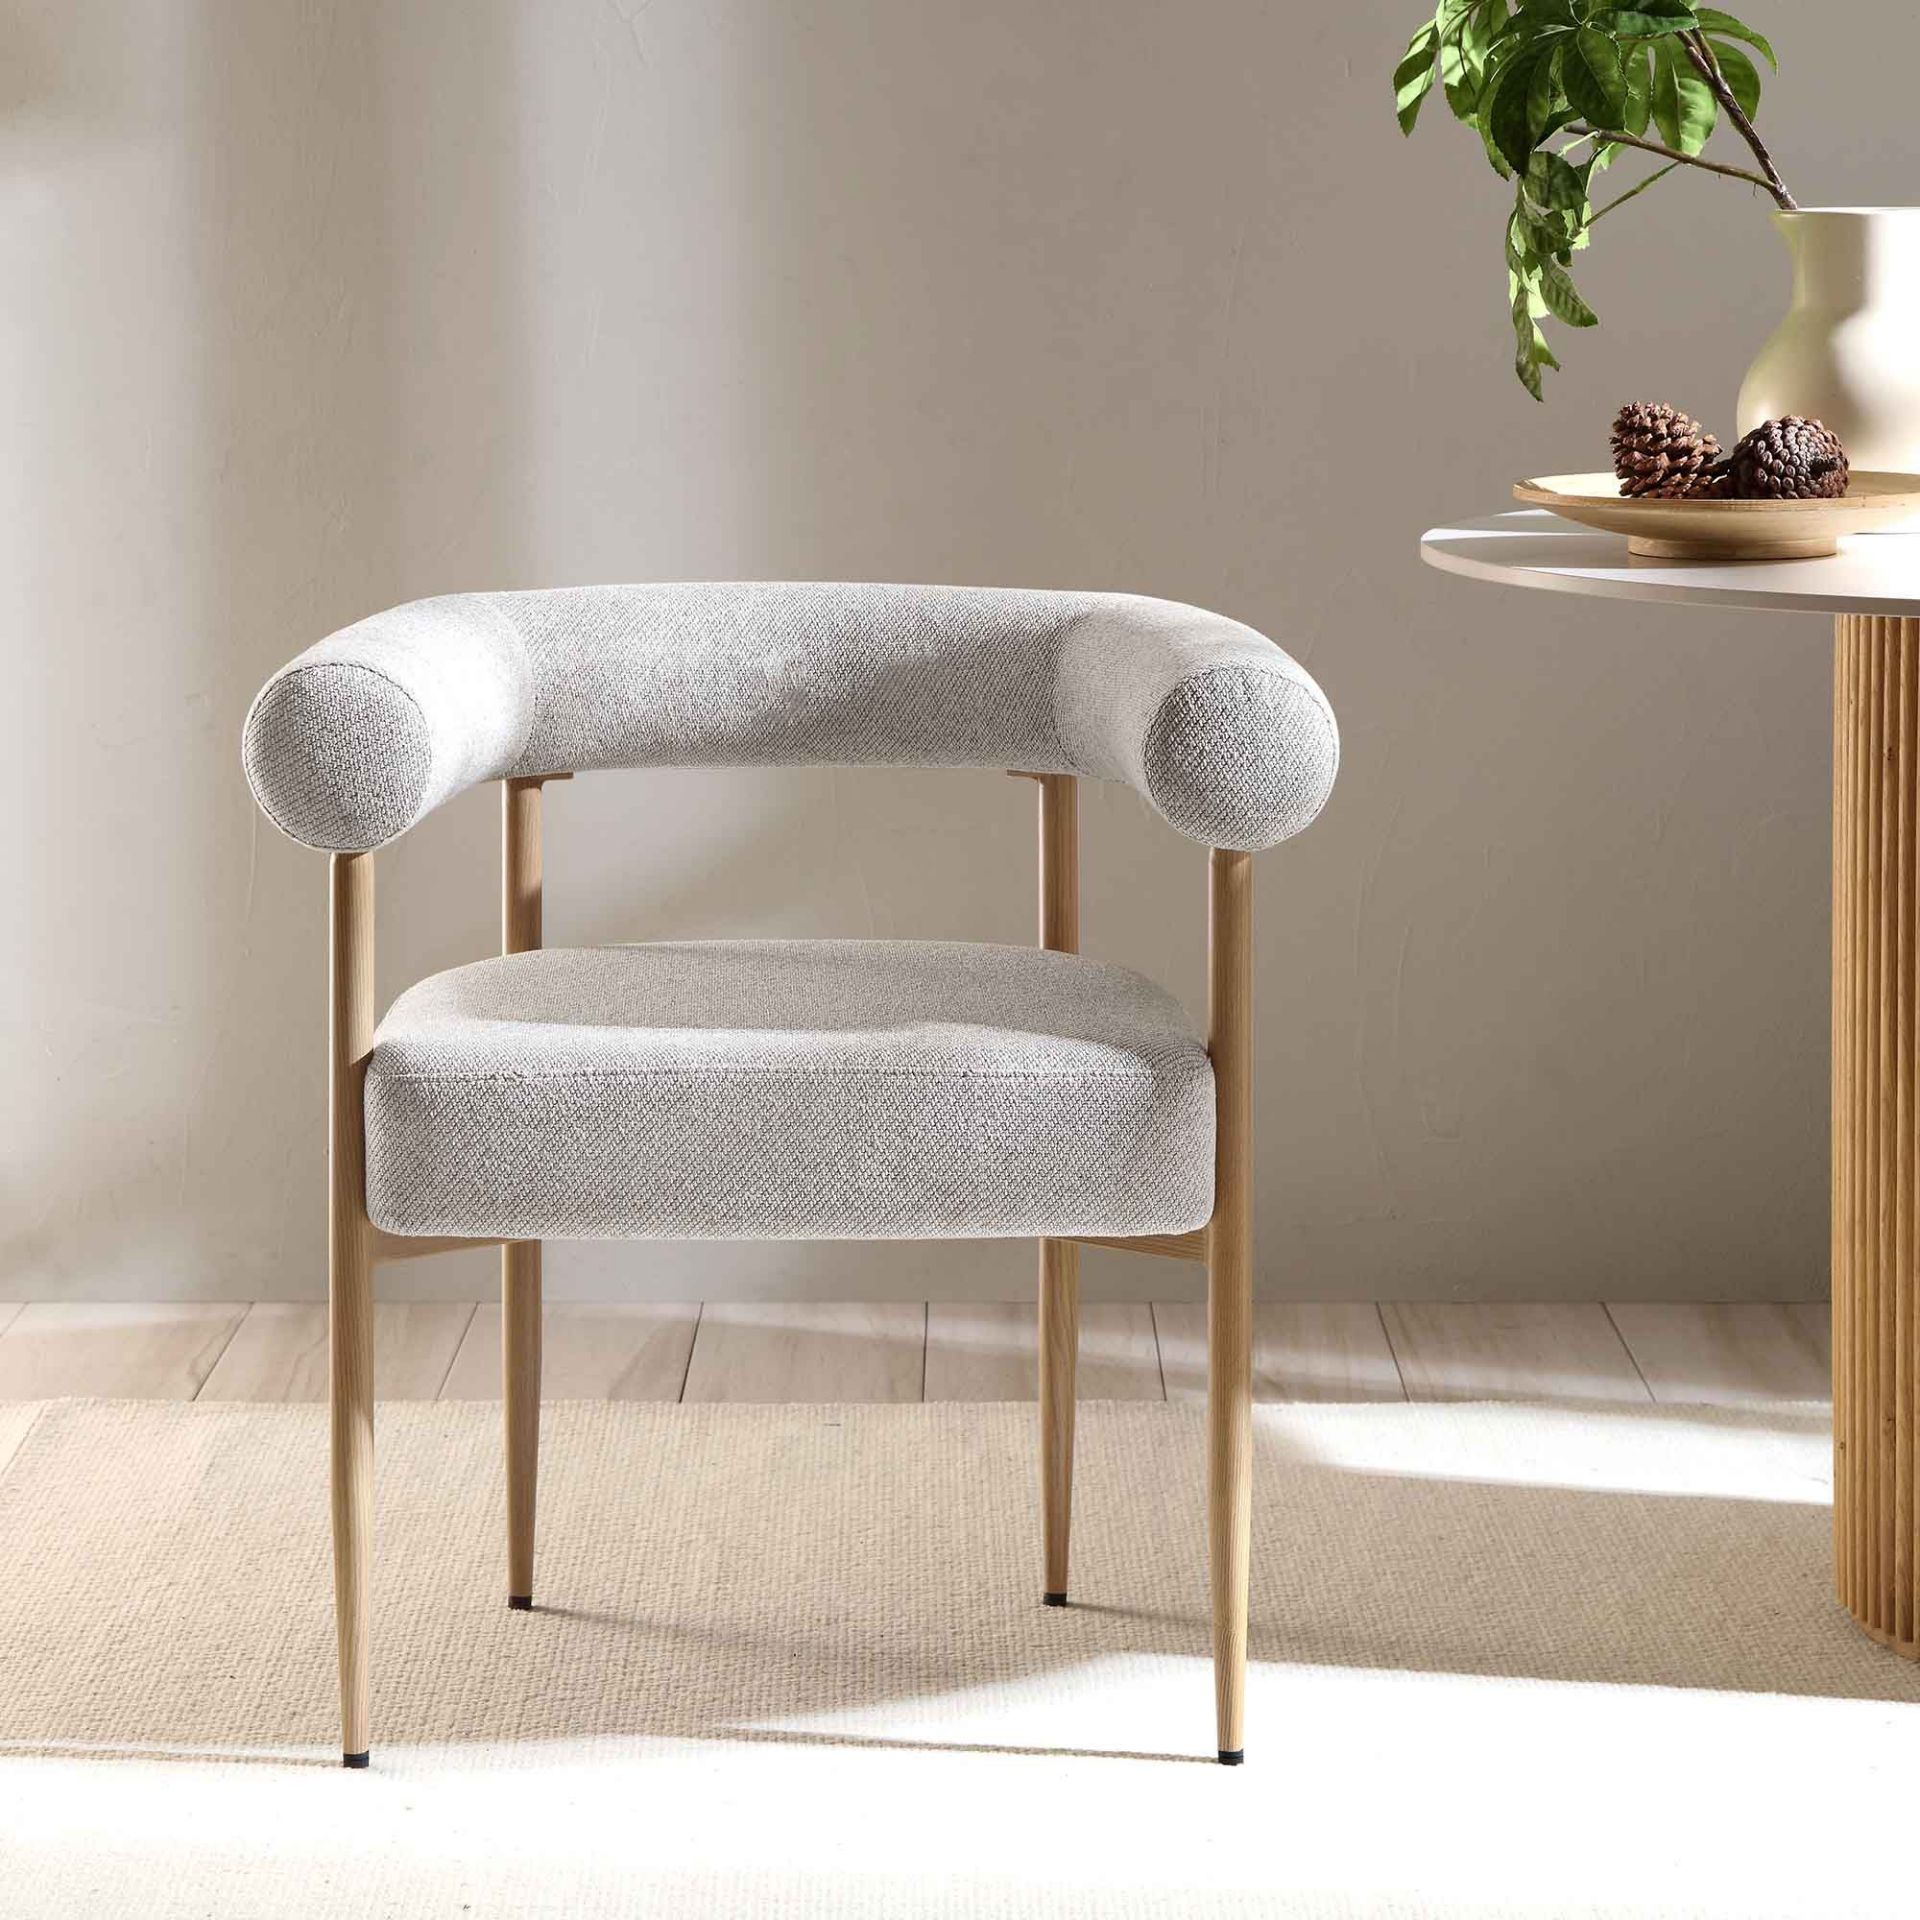 Fulbourn Beige Woven Dining Chair with Natural Wood Effect Legs. - R19.6. RRP £199.99. Well-